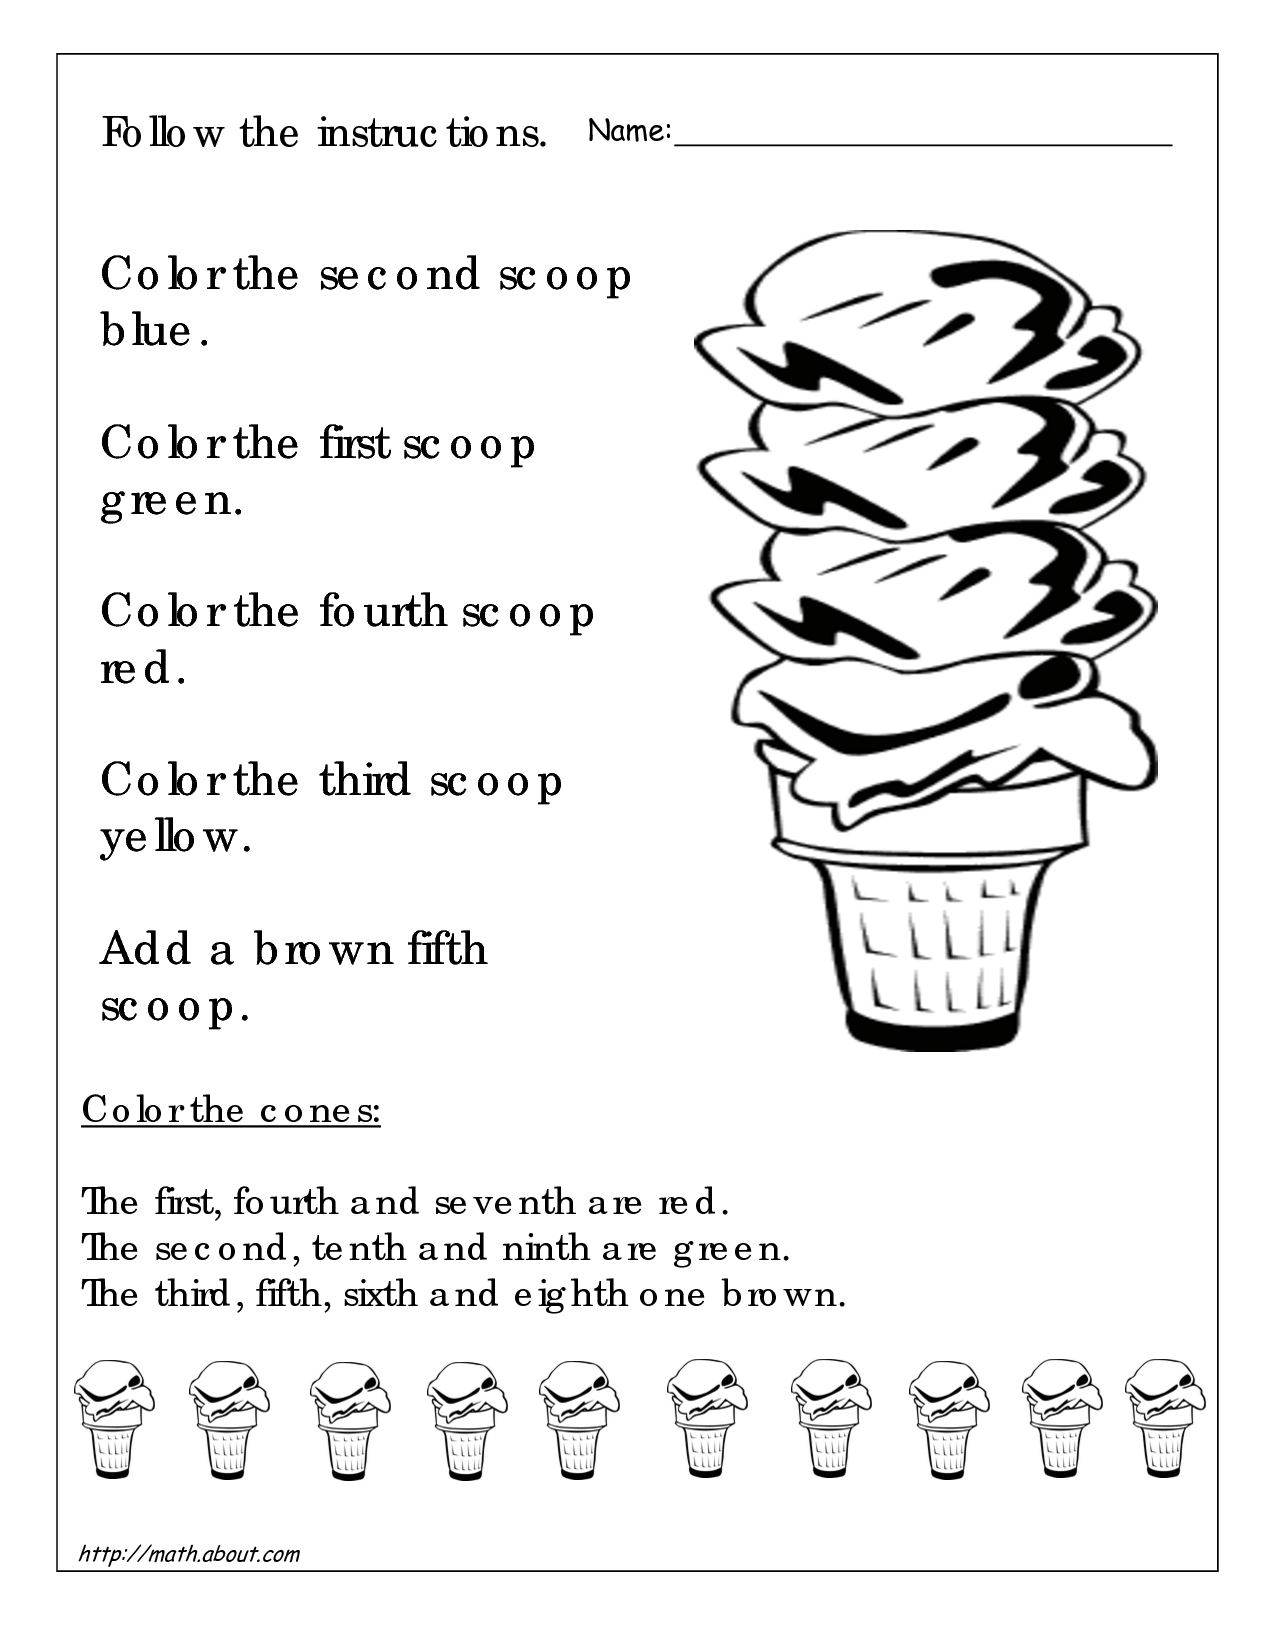 11 Best Images of Position Of Objects Worksheets PreK